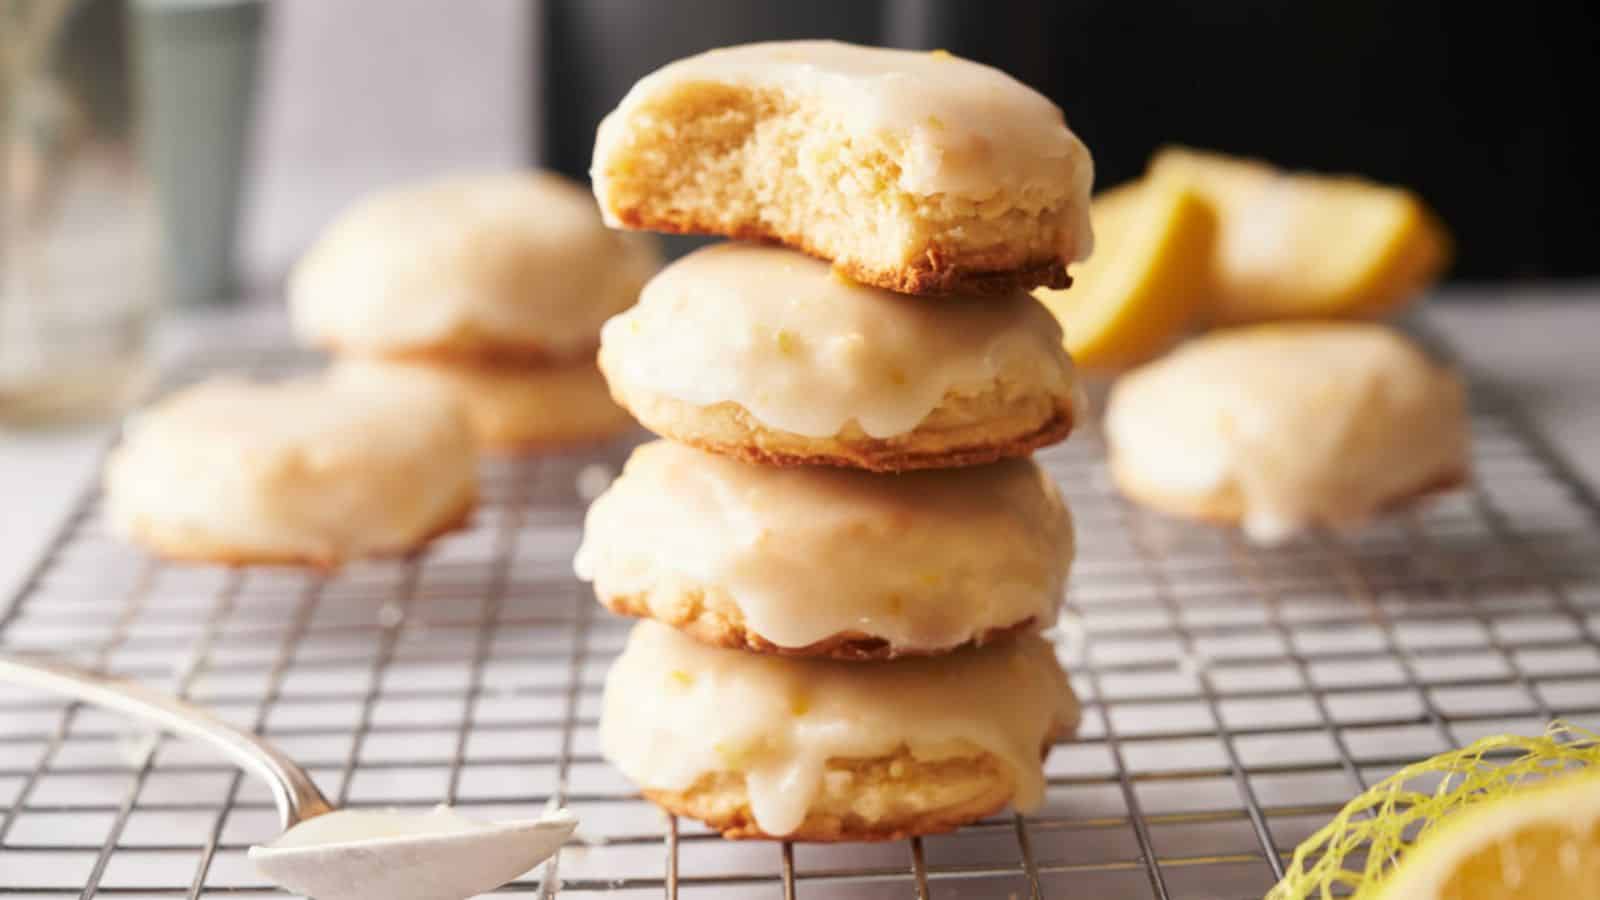 A stack of lemon cookies on a cooling rack.